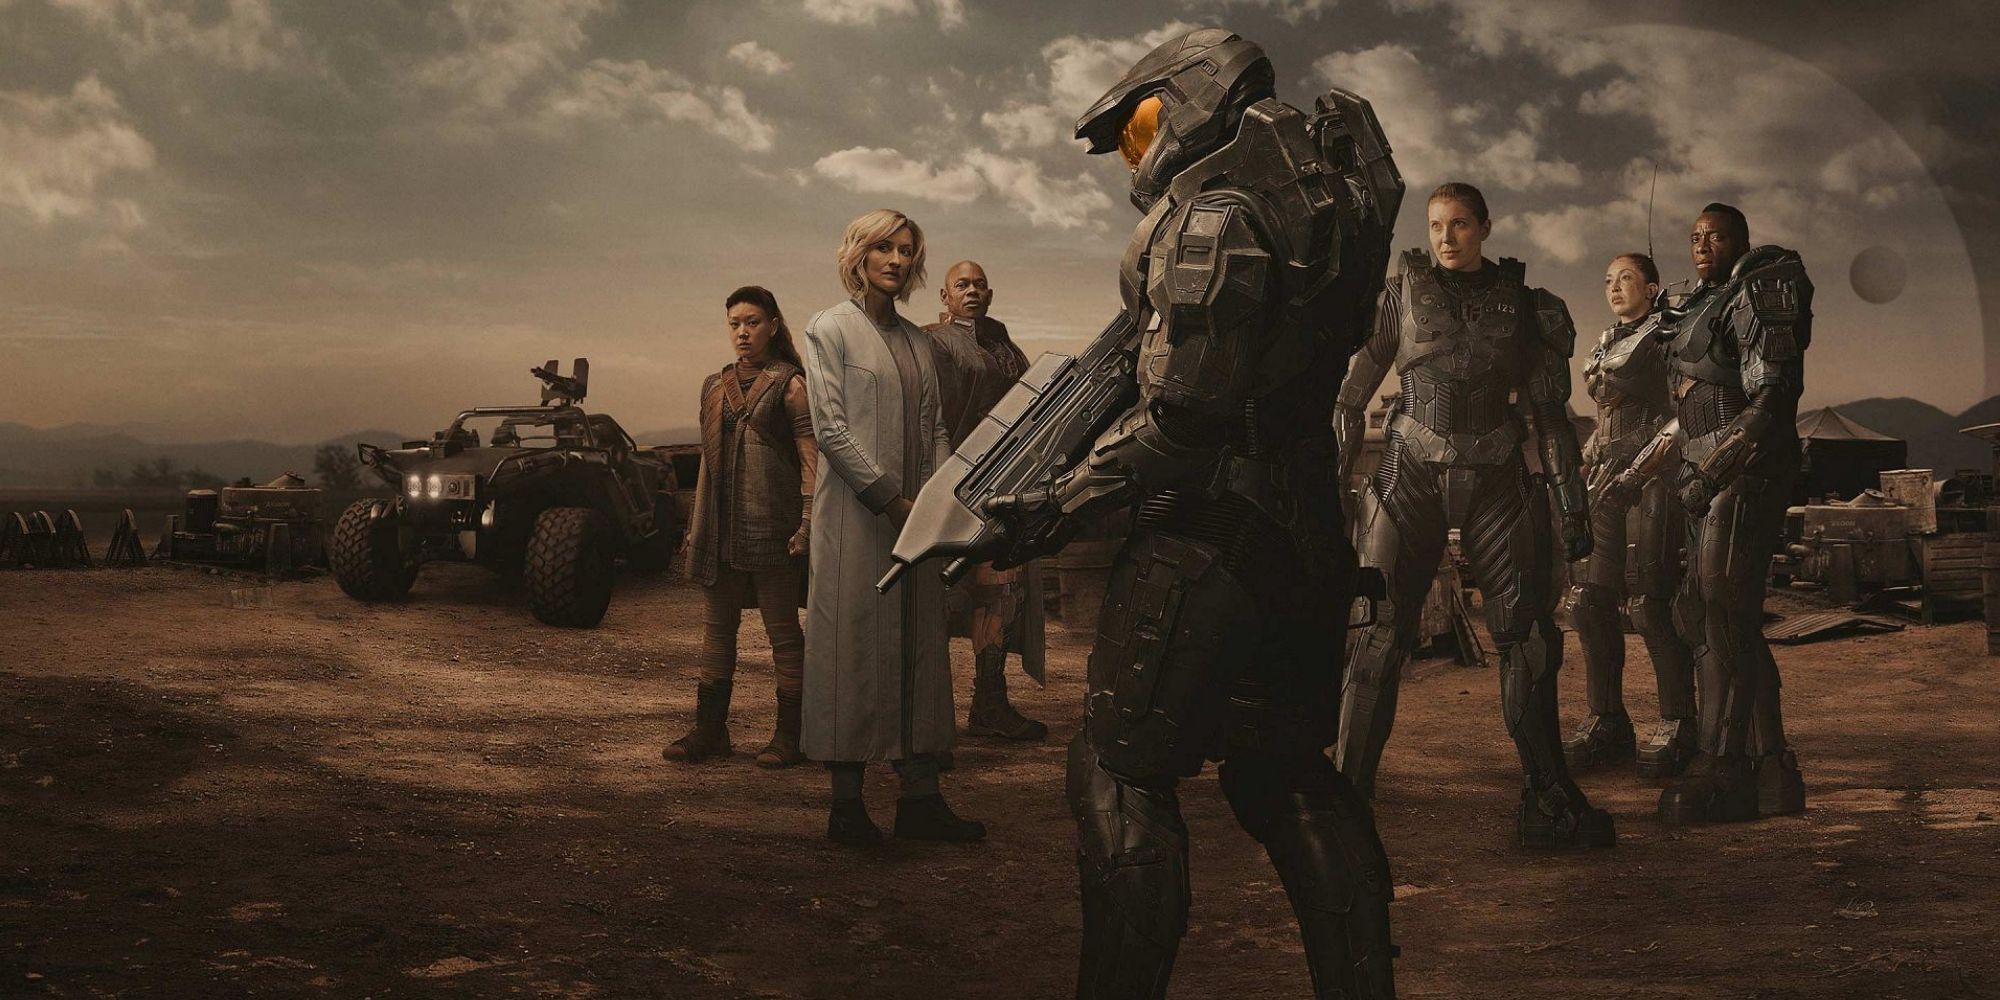 Promotional wallpaper of the cast of 'Halo' 